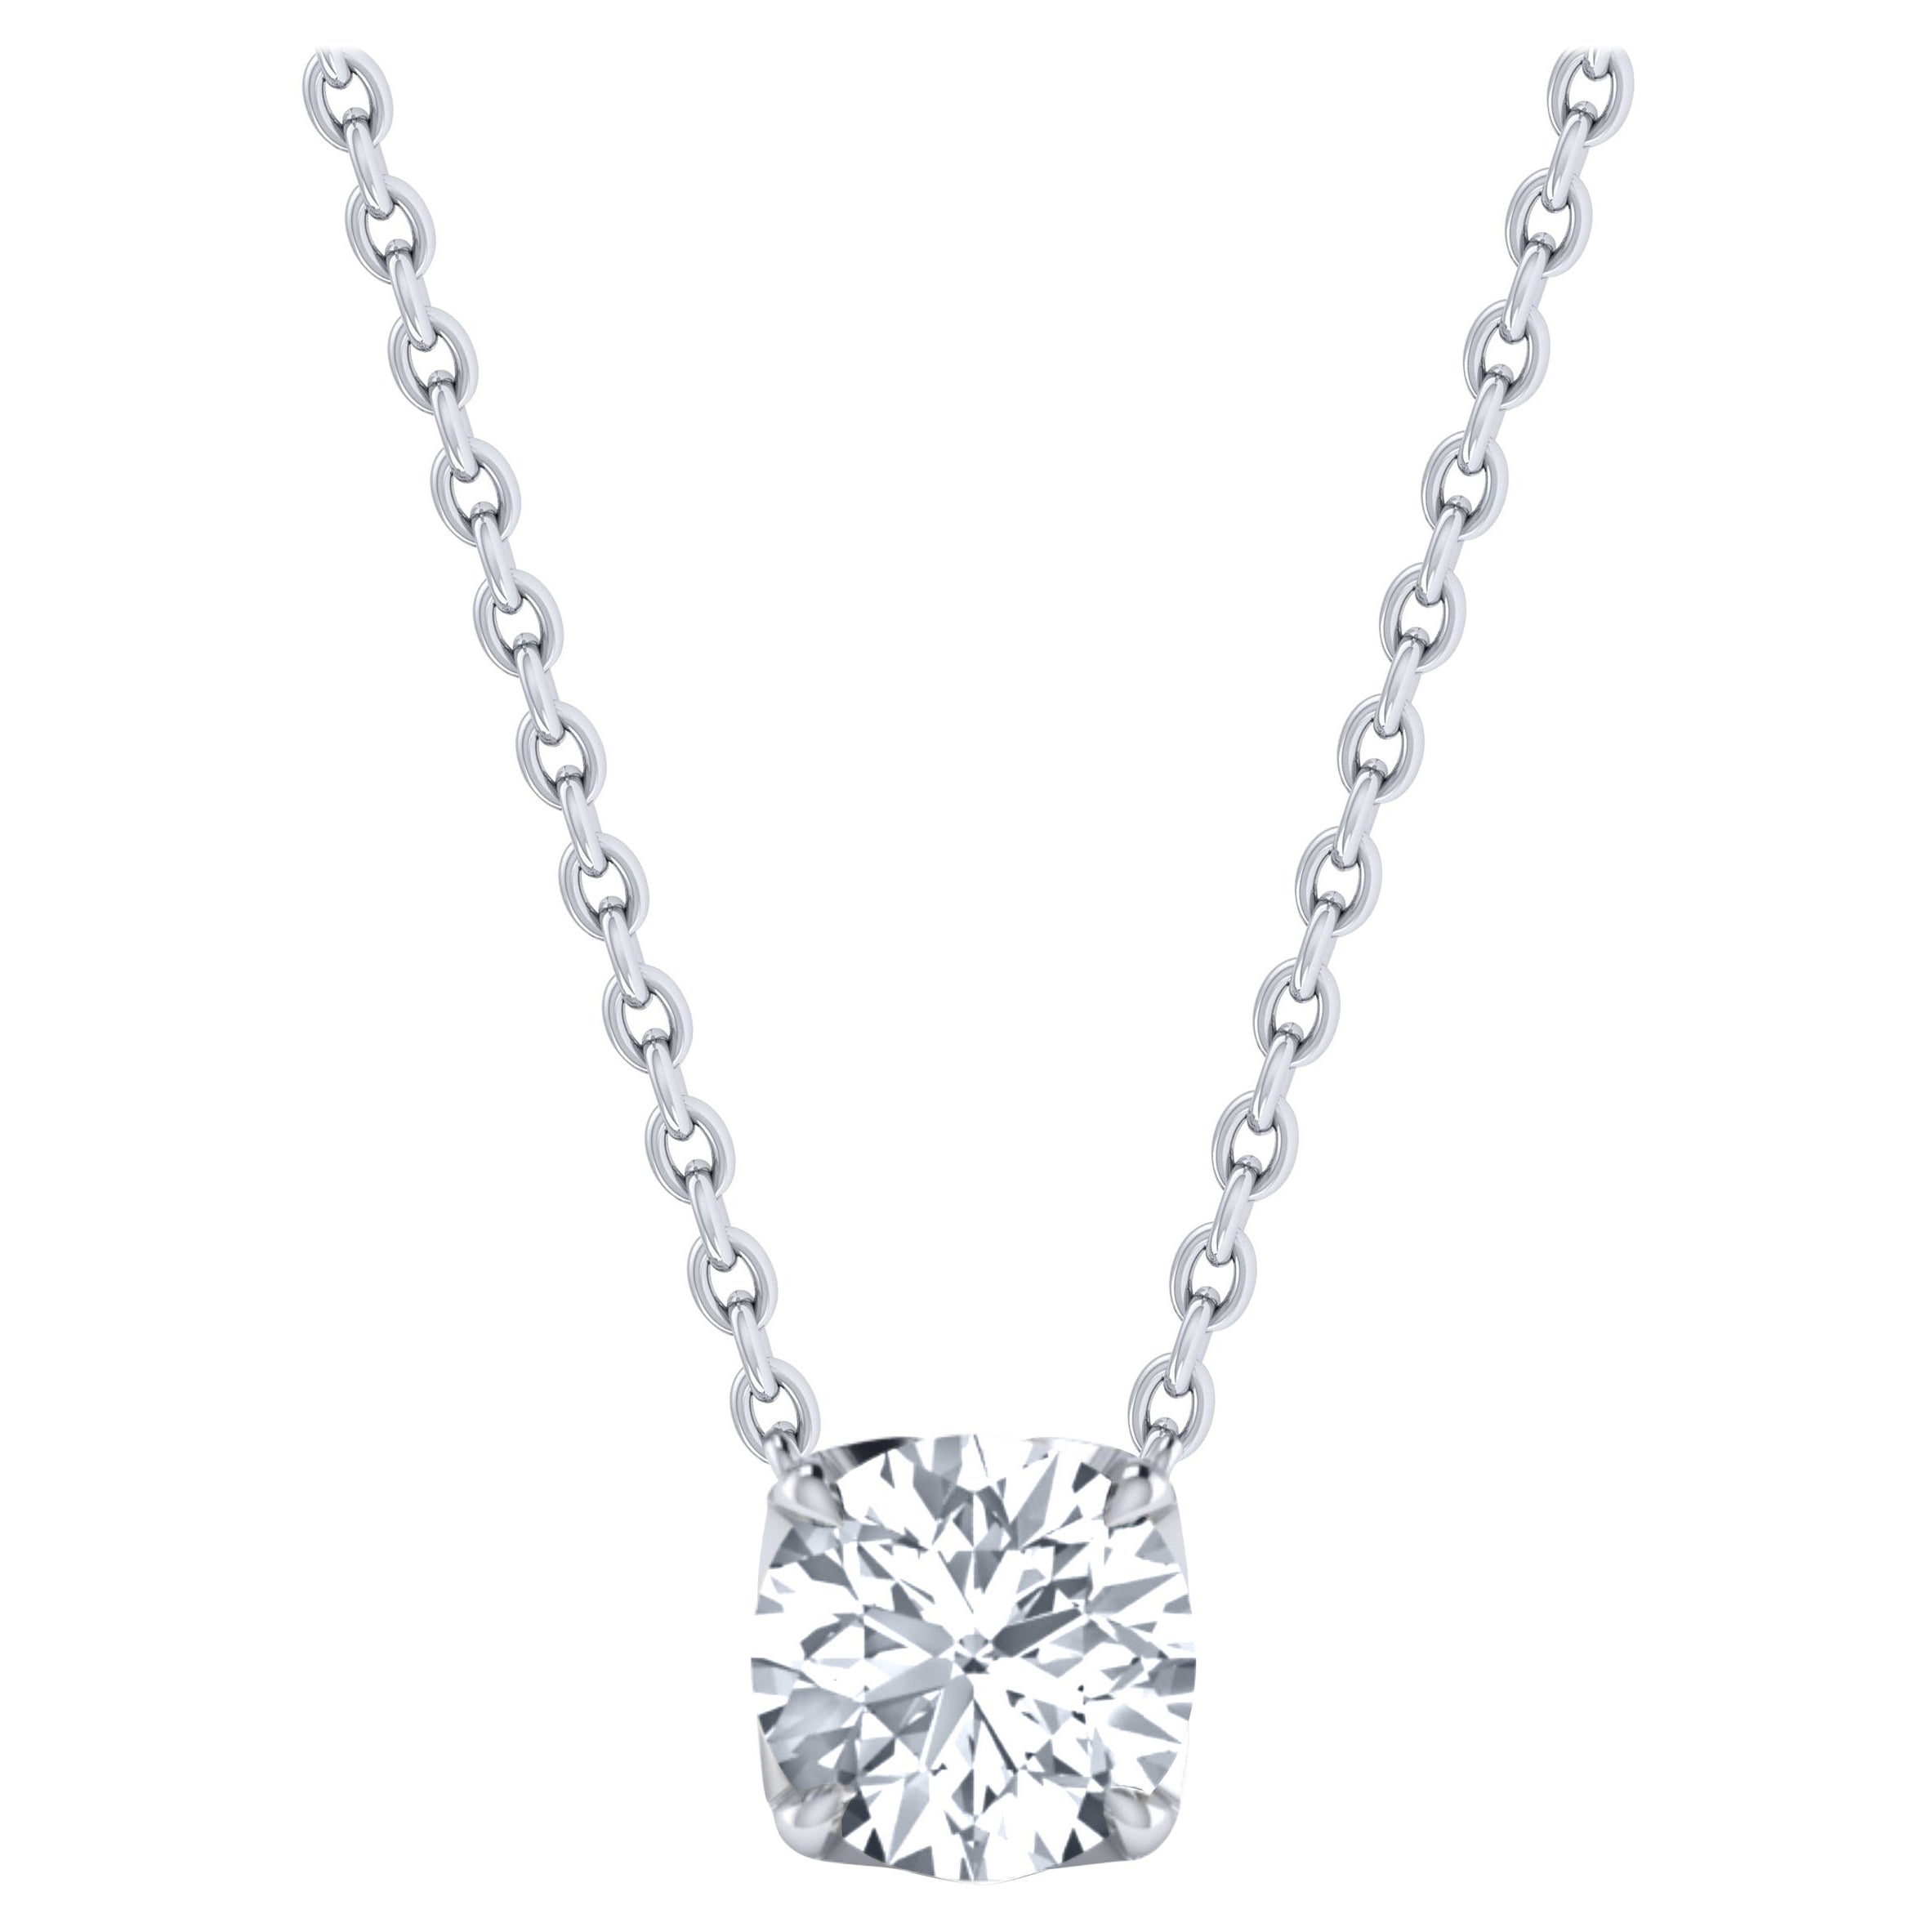 Harakh GIA Certified 0.28 Carat Solitaire Diamond Pendant Necklace in 18 KT Gold For Sale